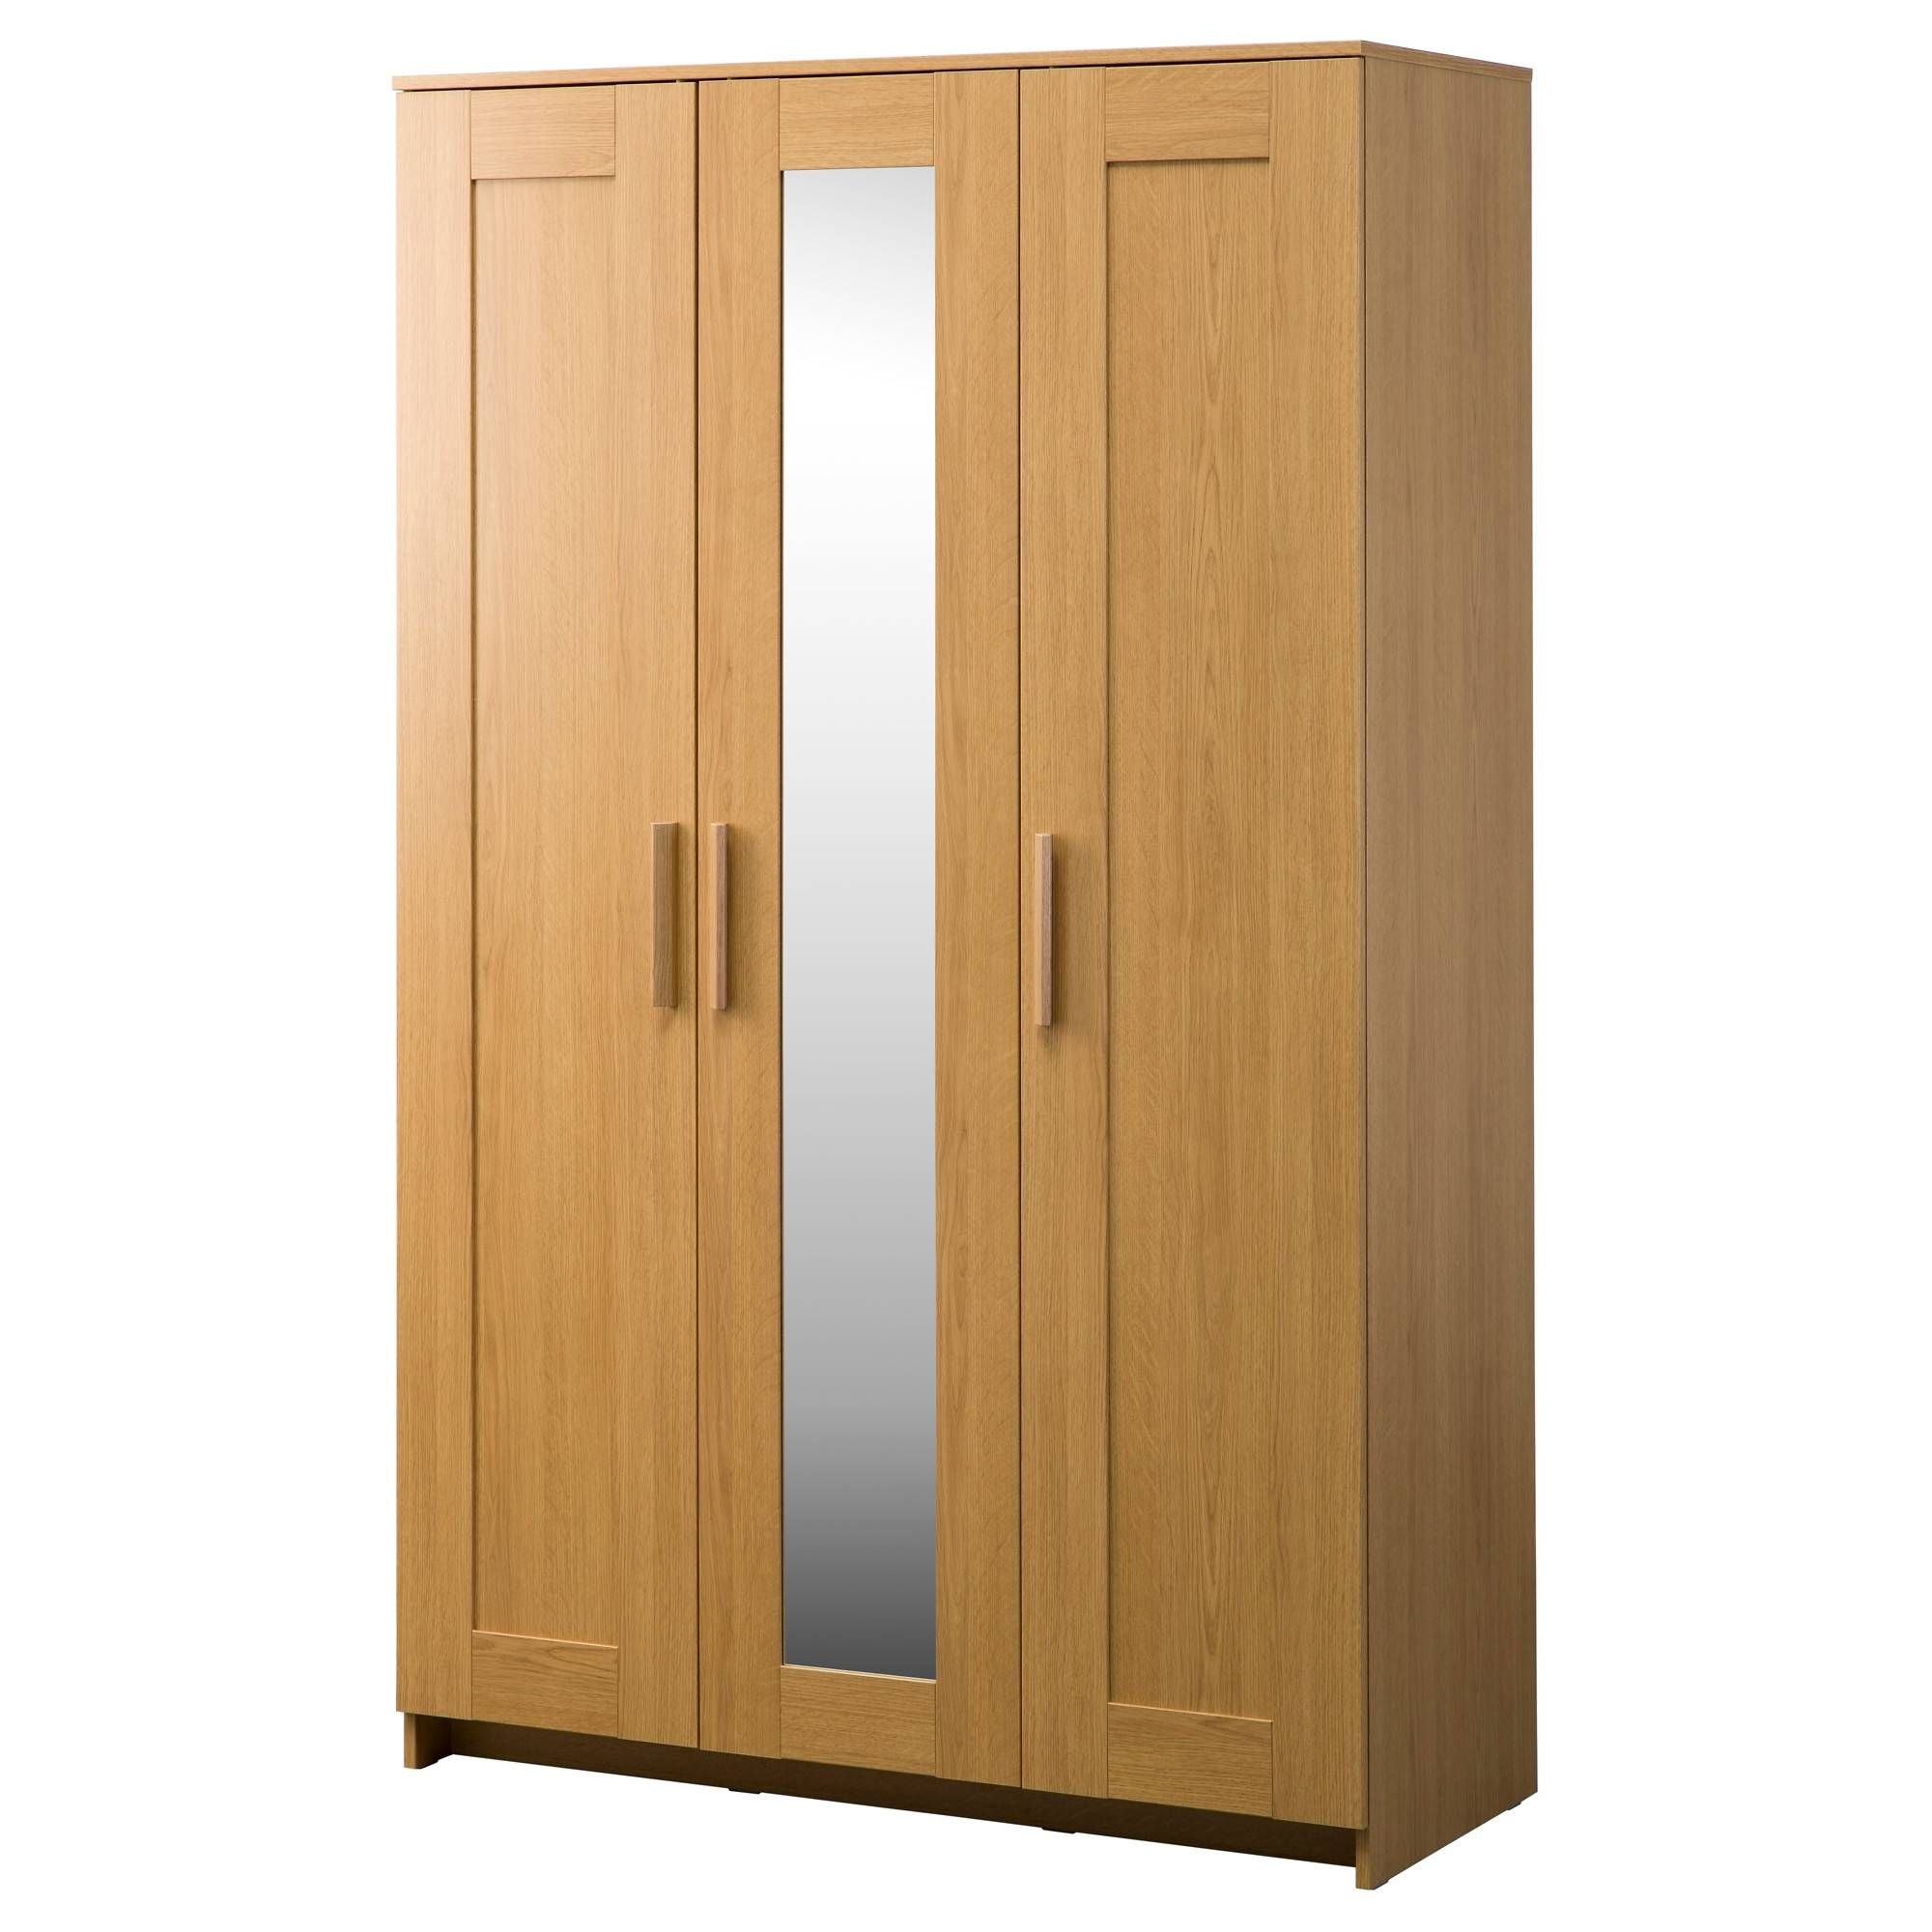 Wardrobes | Ikea Intended For 3 Door Wardrobe With Drawers And Shelves (View 17 of 30)